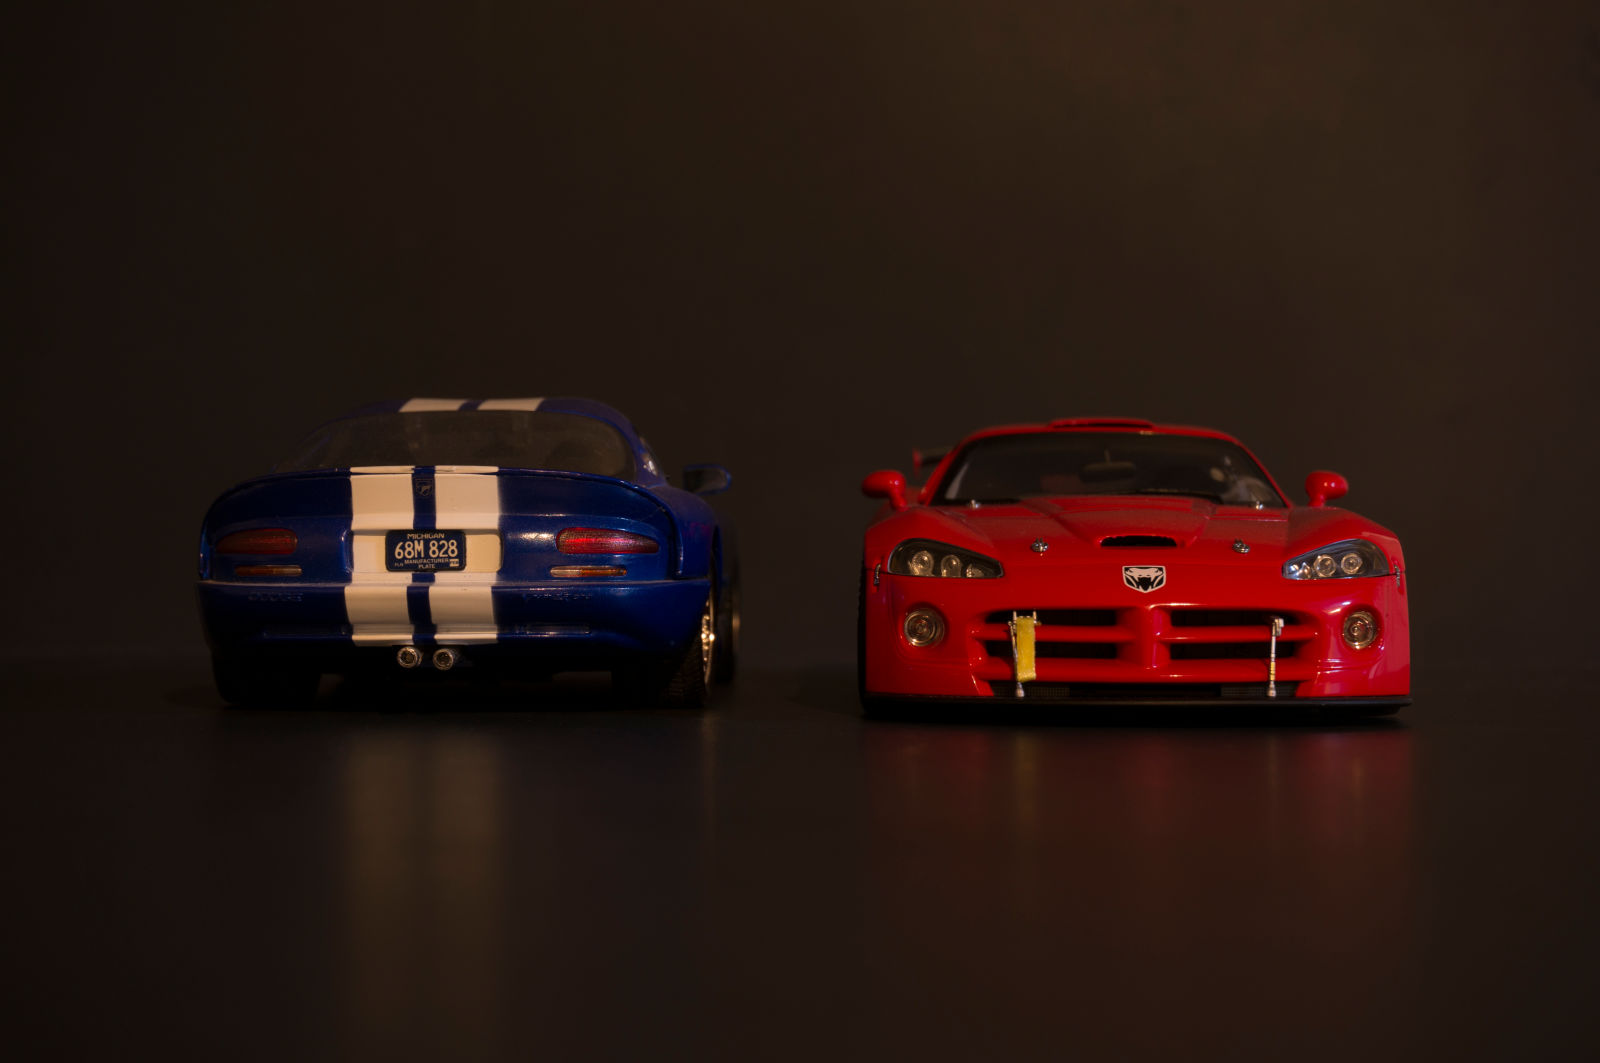 Illustration for article titled Generation Gap: 1:18 AUTOart Viper Competition Coupe